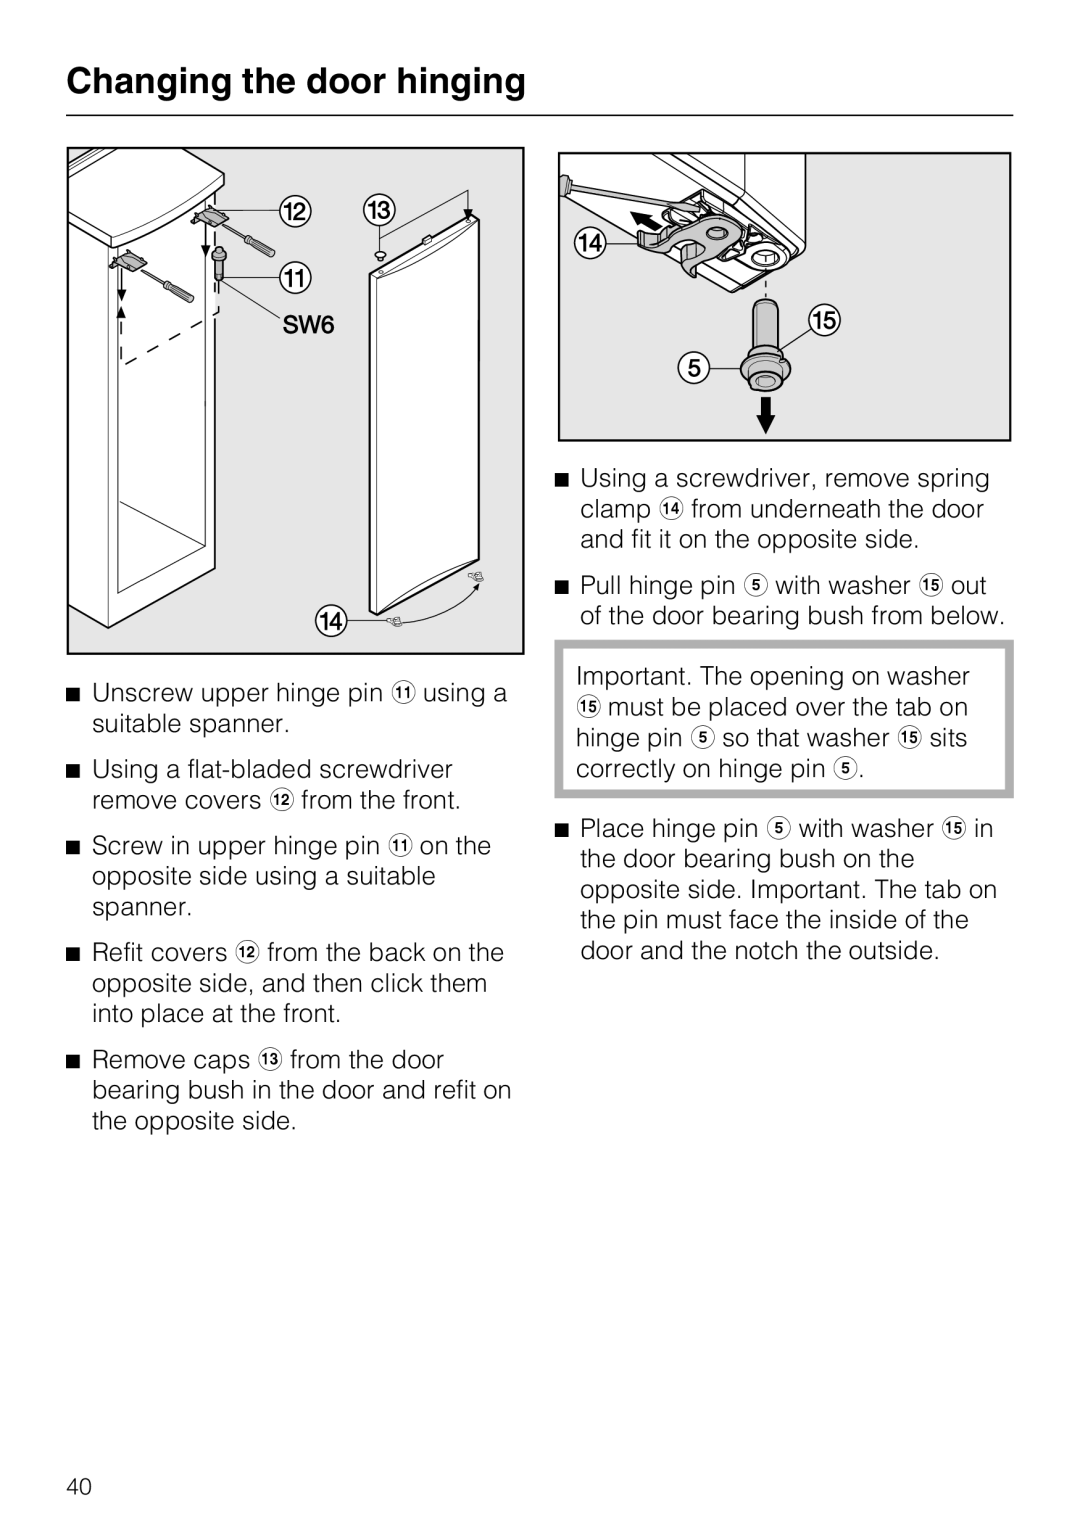 Miele K 12421 SD installation instructions Changing the door hinging, Unscrew upper hinge pin k using a suitable spanner 